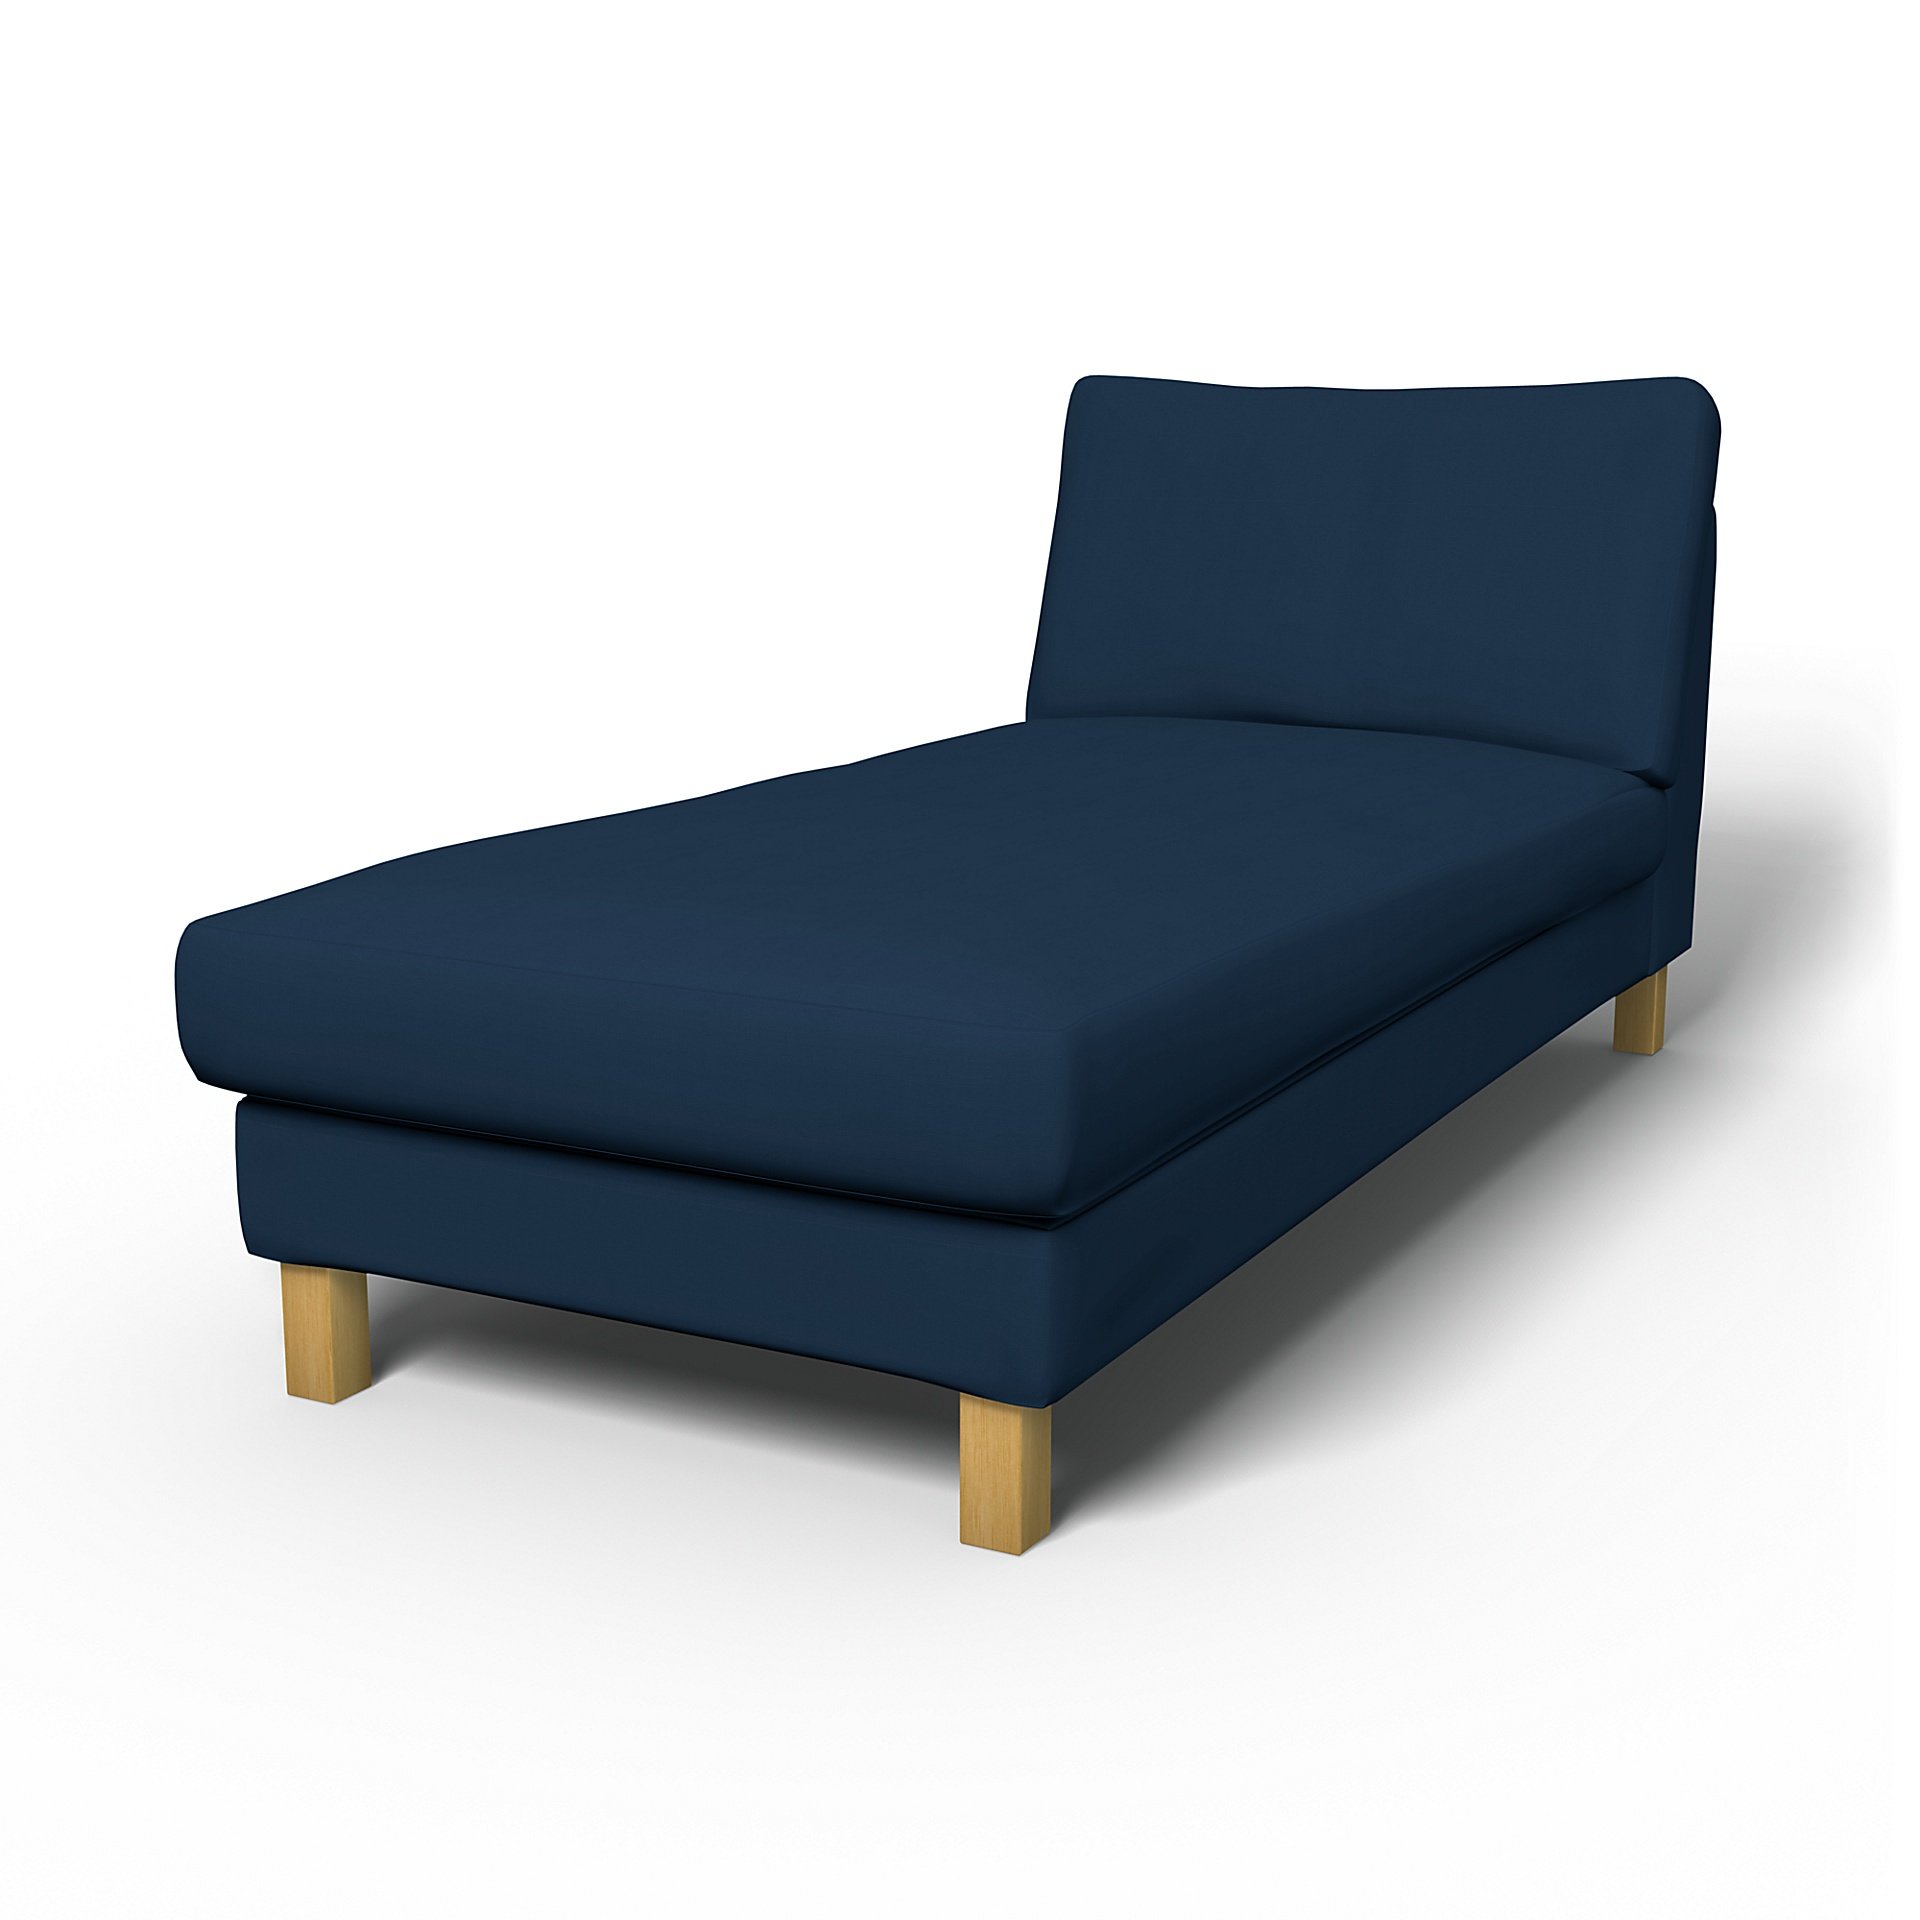 IKEA - Karlstad Stand Alone Chaise Longue Cover, Deep Navy Blue, Cotton - Bemz